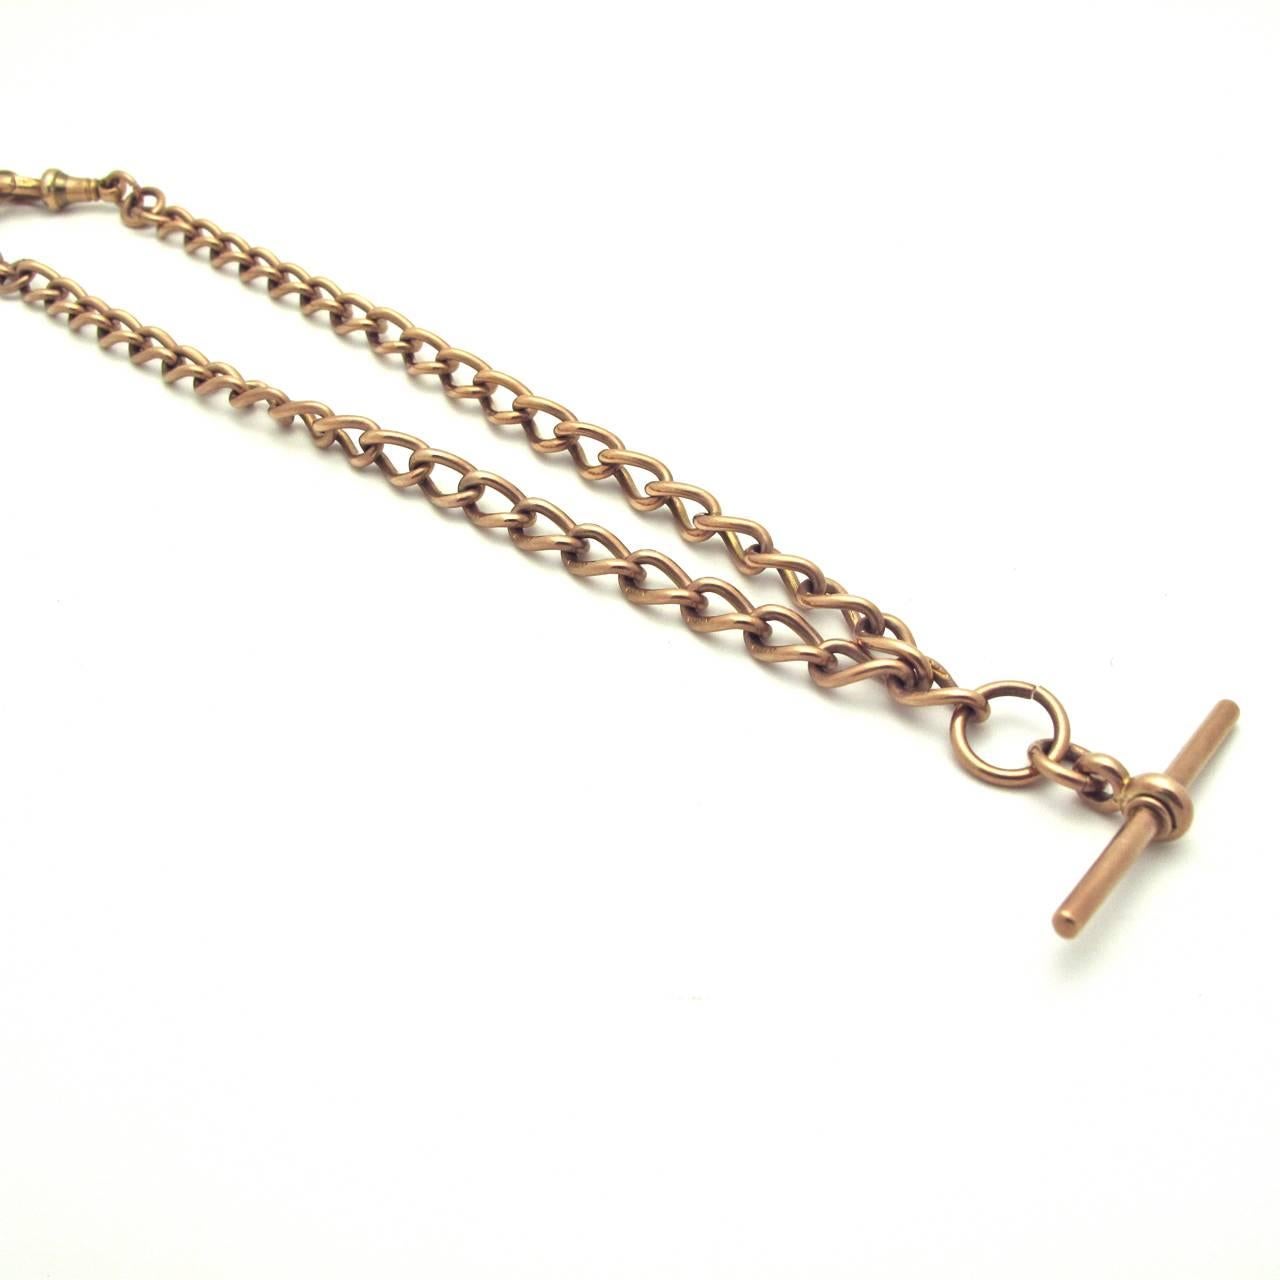 Watch fob chains have grown in popularity over recent years. This one can be worn as a necklace or doubled and worn as a bracelet. You can add a charm to personalize it or wear alone. This is a 'classic' you will wear always.